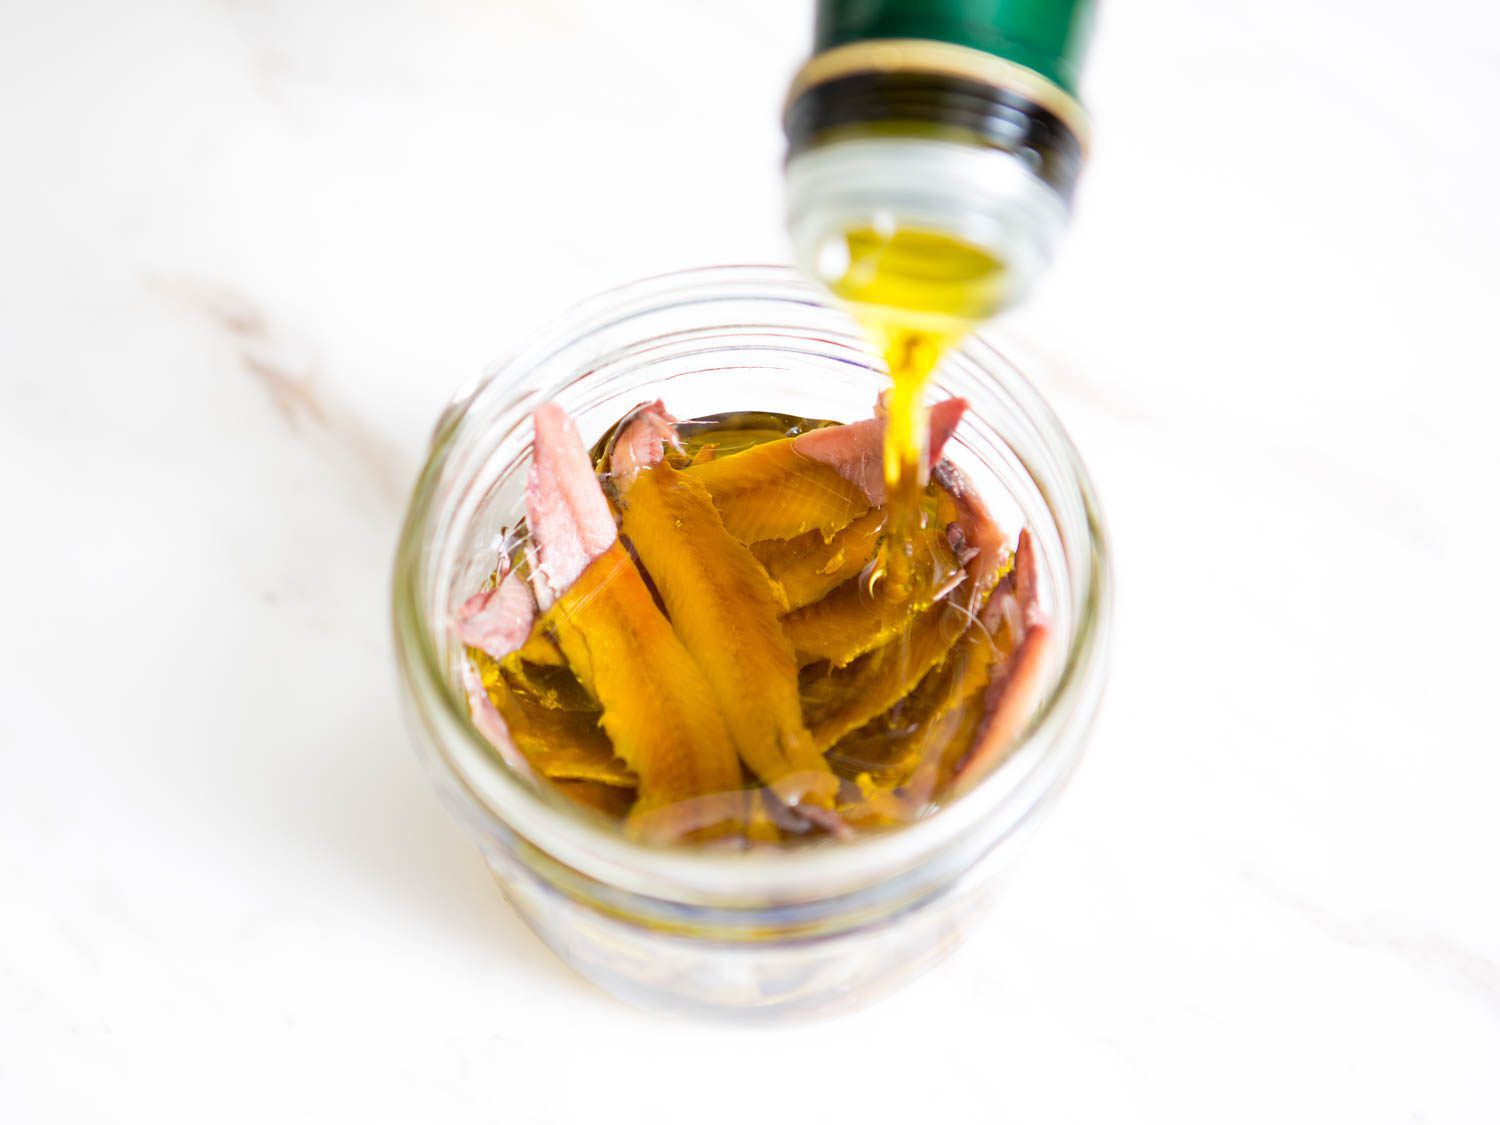 Salt-packed anchovy fillets, rinsed and deboned, are placed in a small canning jar and submerged in olive oil.